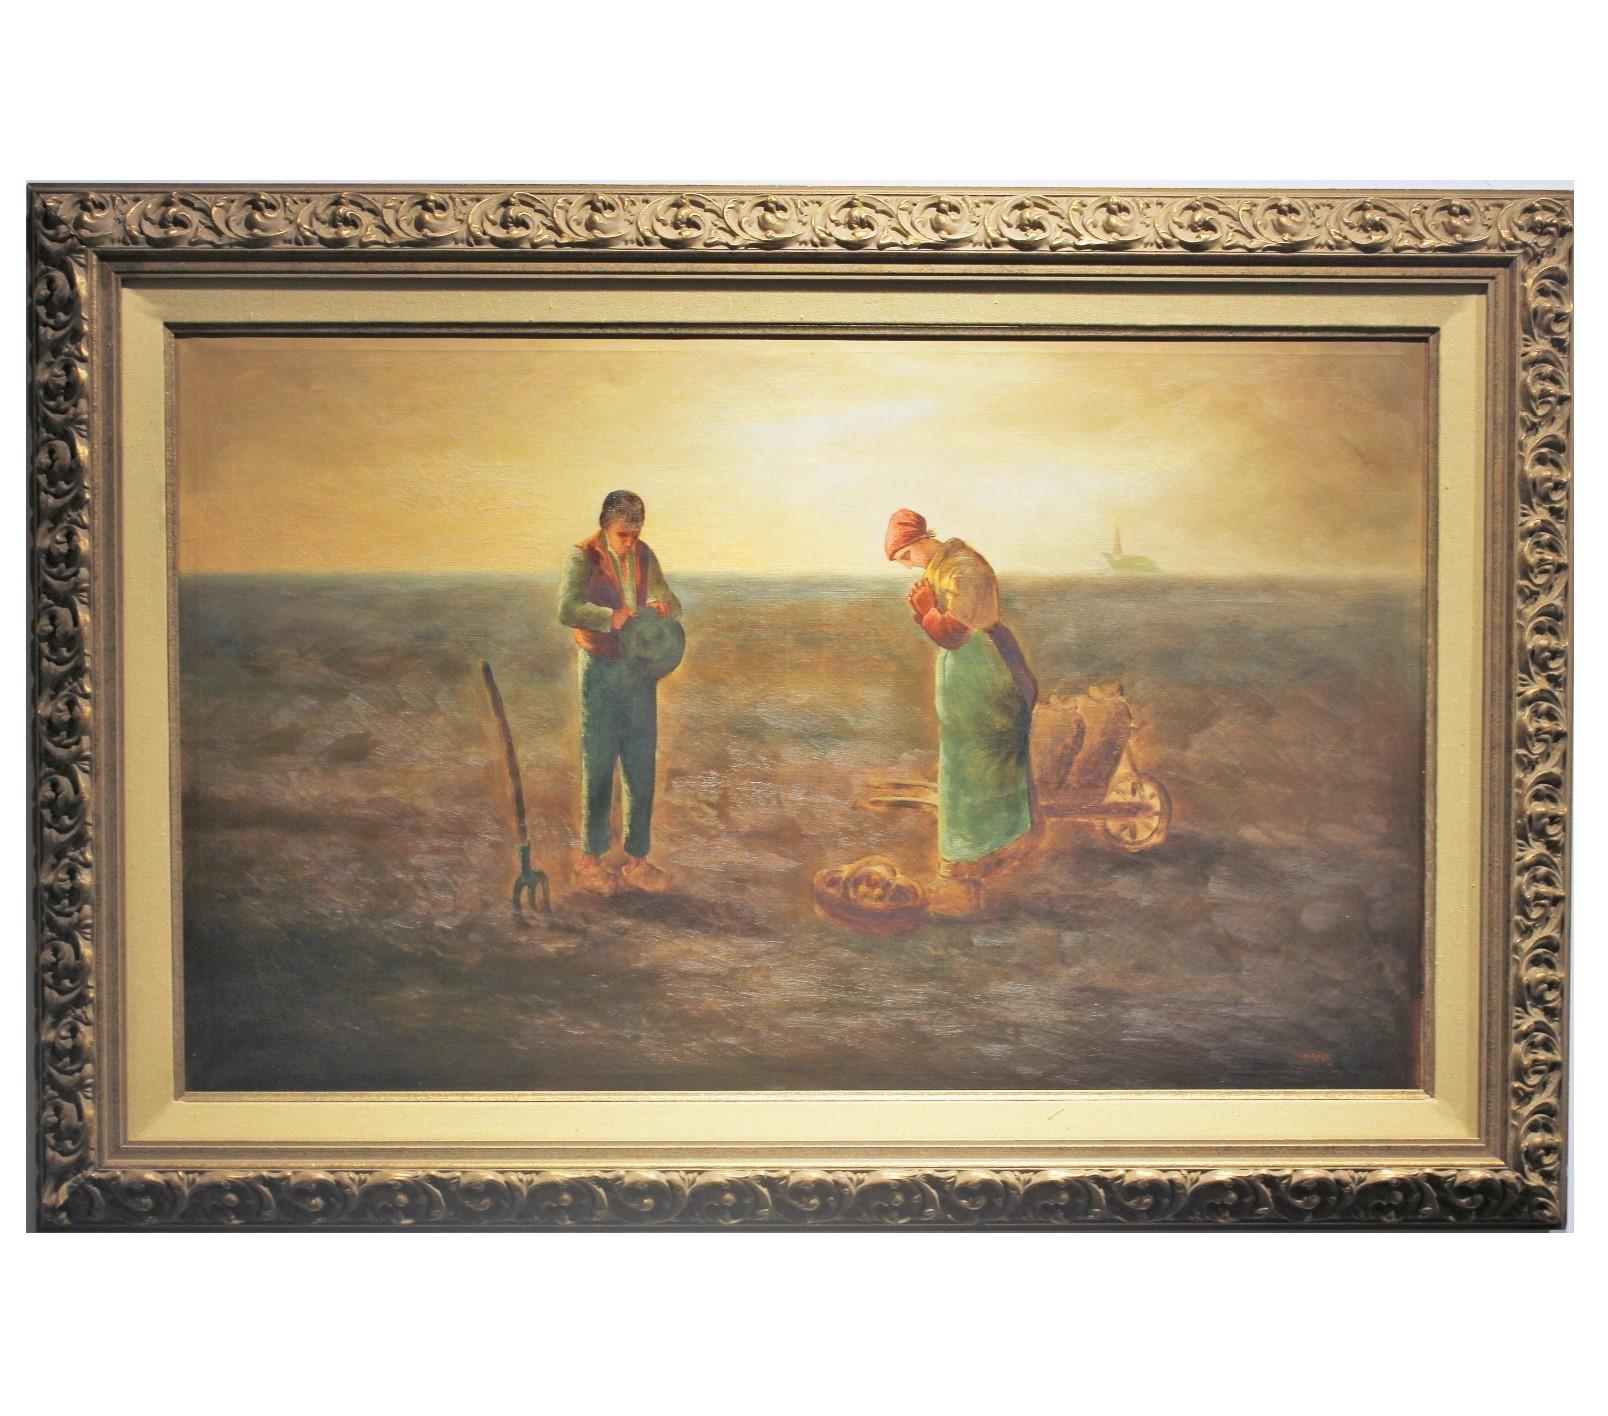 (After) Jean-François Millet Landscape Painting - Painting Study of "The Angelus" 